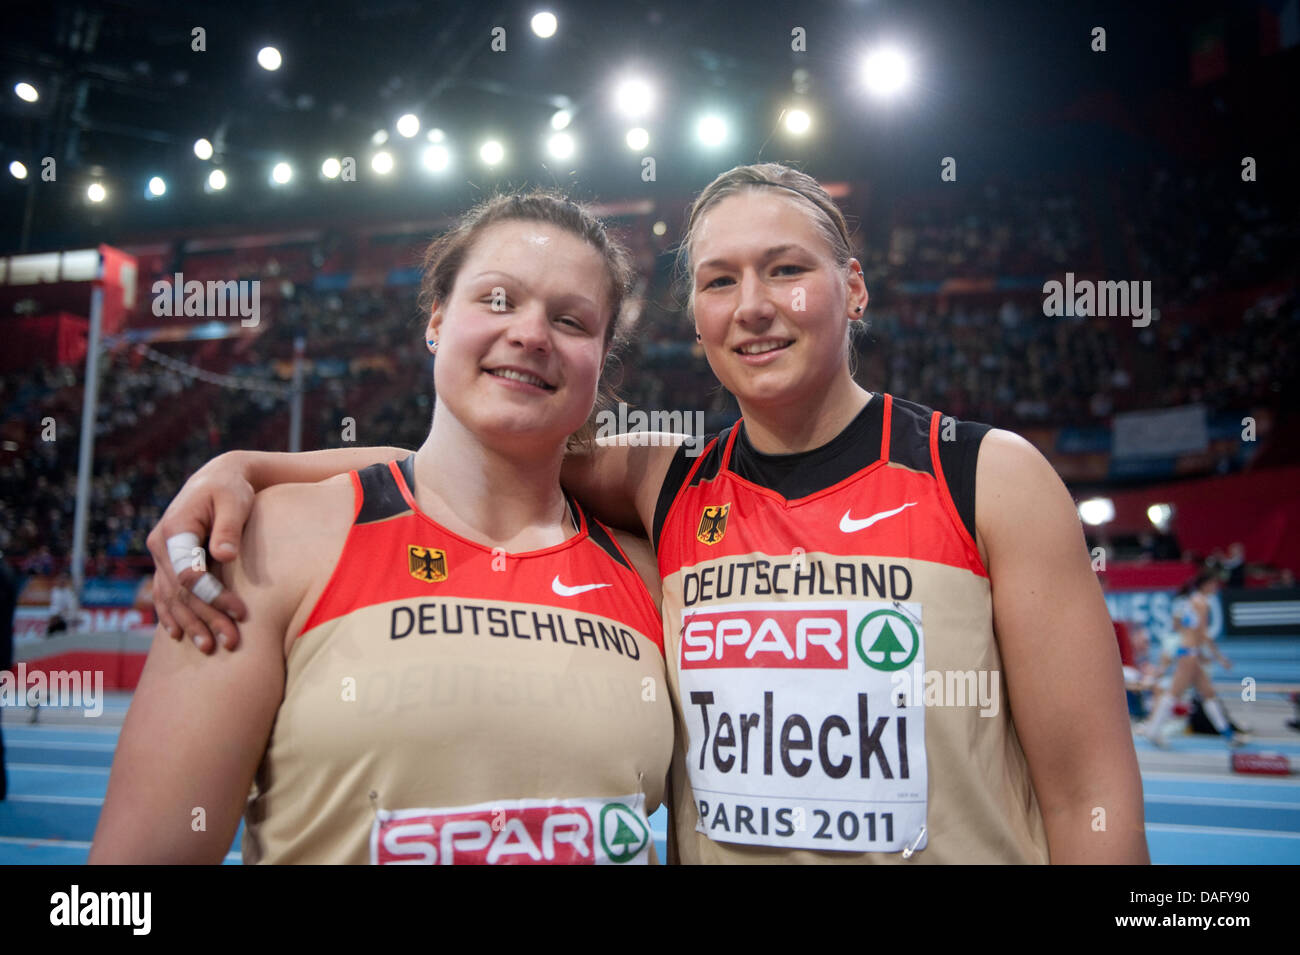 German athletes Christina Schwanitz (L) and Josephine Terlecki are pictured after the women's shot put finals of the European Athletics Indoor Championships at the Palais Omnisports in Paris, France, 05 March 2011. Schwanitz took second place and Terlecki won the bronze medal. Photo: Bernd Thissen Stock Photo